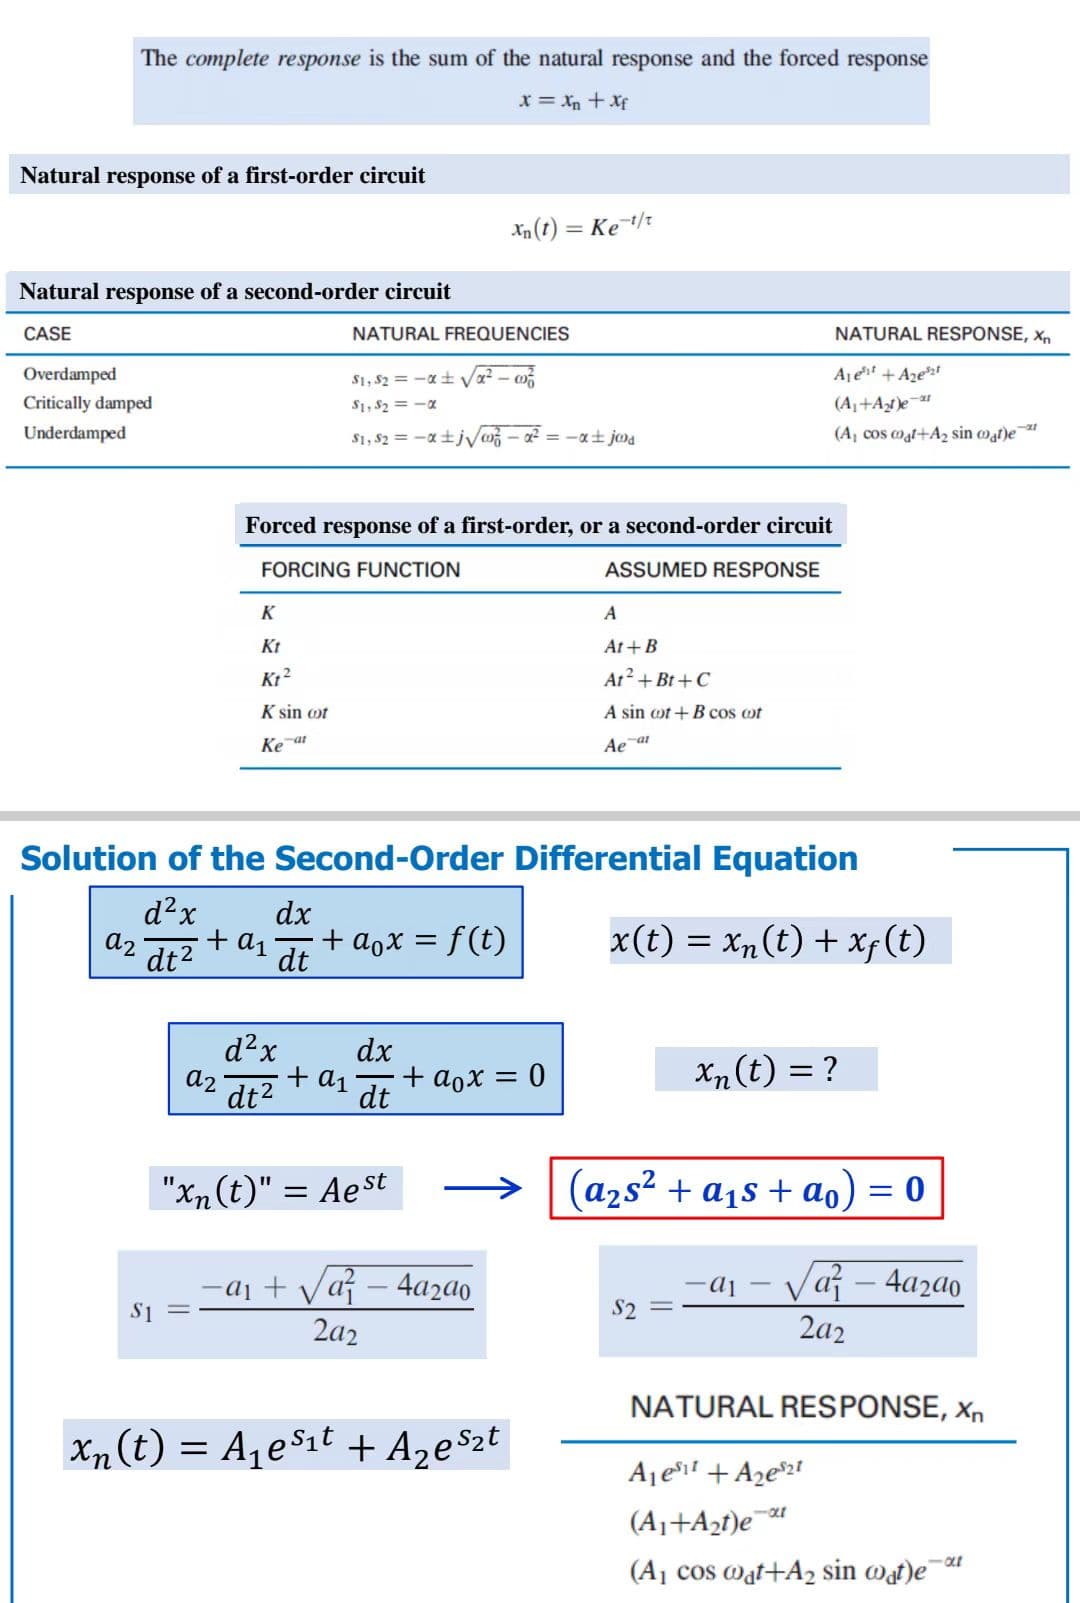 The complete response is the sum of the natural response and the forced response
X = Xn+Xf
Natural response of a first-order circuit
Natural response of a second-order circuit
CASE
Overdamped
Critically damped
Underdamped
az
S1 =
FORCING FUNCTION
K
Kt
K₁²
K sin cot
Ke at
Forced response of a first-order, or a second-order circuit
+ A₁
NATURAL FREQUENCIES
$1,52 = -α± √√² - 0²
$1,$₂=-α
S1, S2 = -x±j√√/0²-a² -α±jood
dx
dt
d²x
dt²
Solution of the Second-Order Differential Equation
d²x
x(t) = xn(t) + xf (t)
a2
dt²
+ a。x = f(t)
+ A1
dx
dt
"xn(t)" = Aest
Xn(t) = Ke-t/t
+ a。x = 0
-a₁ + √²-4a₂a0
242
-
Xn(t) = A₁e³₁ª + A₂e³₂t
ASSUMED RESPONSE
A
At + B
At² +Bt+C
A sin cot + B cos cot
Ae-at
NATURAL RESPONSE, Xn
Ale+Azer
(A₁+A₂t)e-at
(A, cos coat+A₂ sin coat)e
xn(t) = ?
(a₂s² + a₁s+ao) = 0
-α₁ - √²-4a₂a0
242
NATURAL RESPONSE, Xn
A₁ est + A₂e21
-α1
(A₁+A₂t)e
(A₁ cos wat+A₂ sin wat)ext